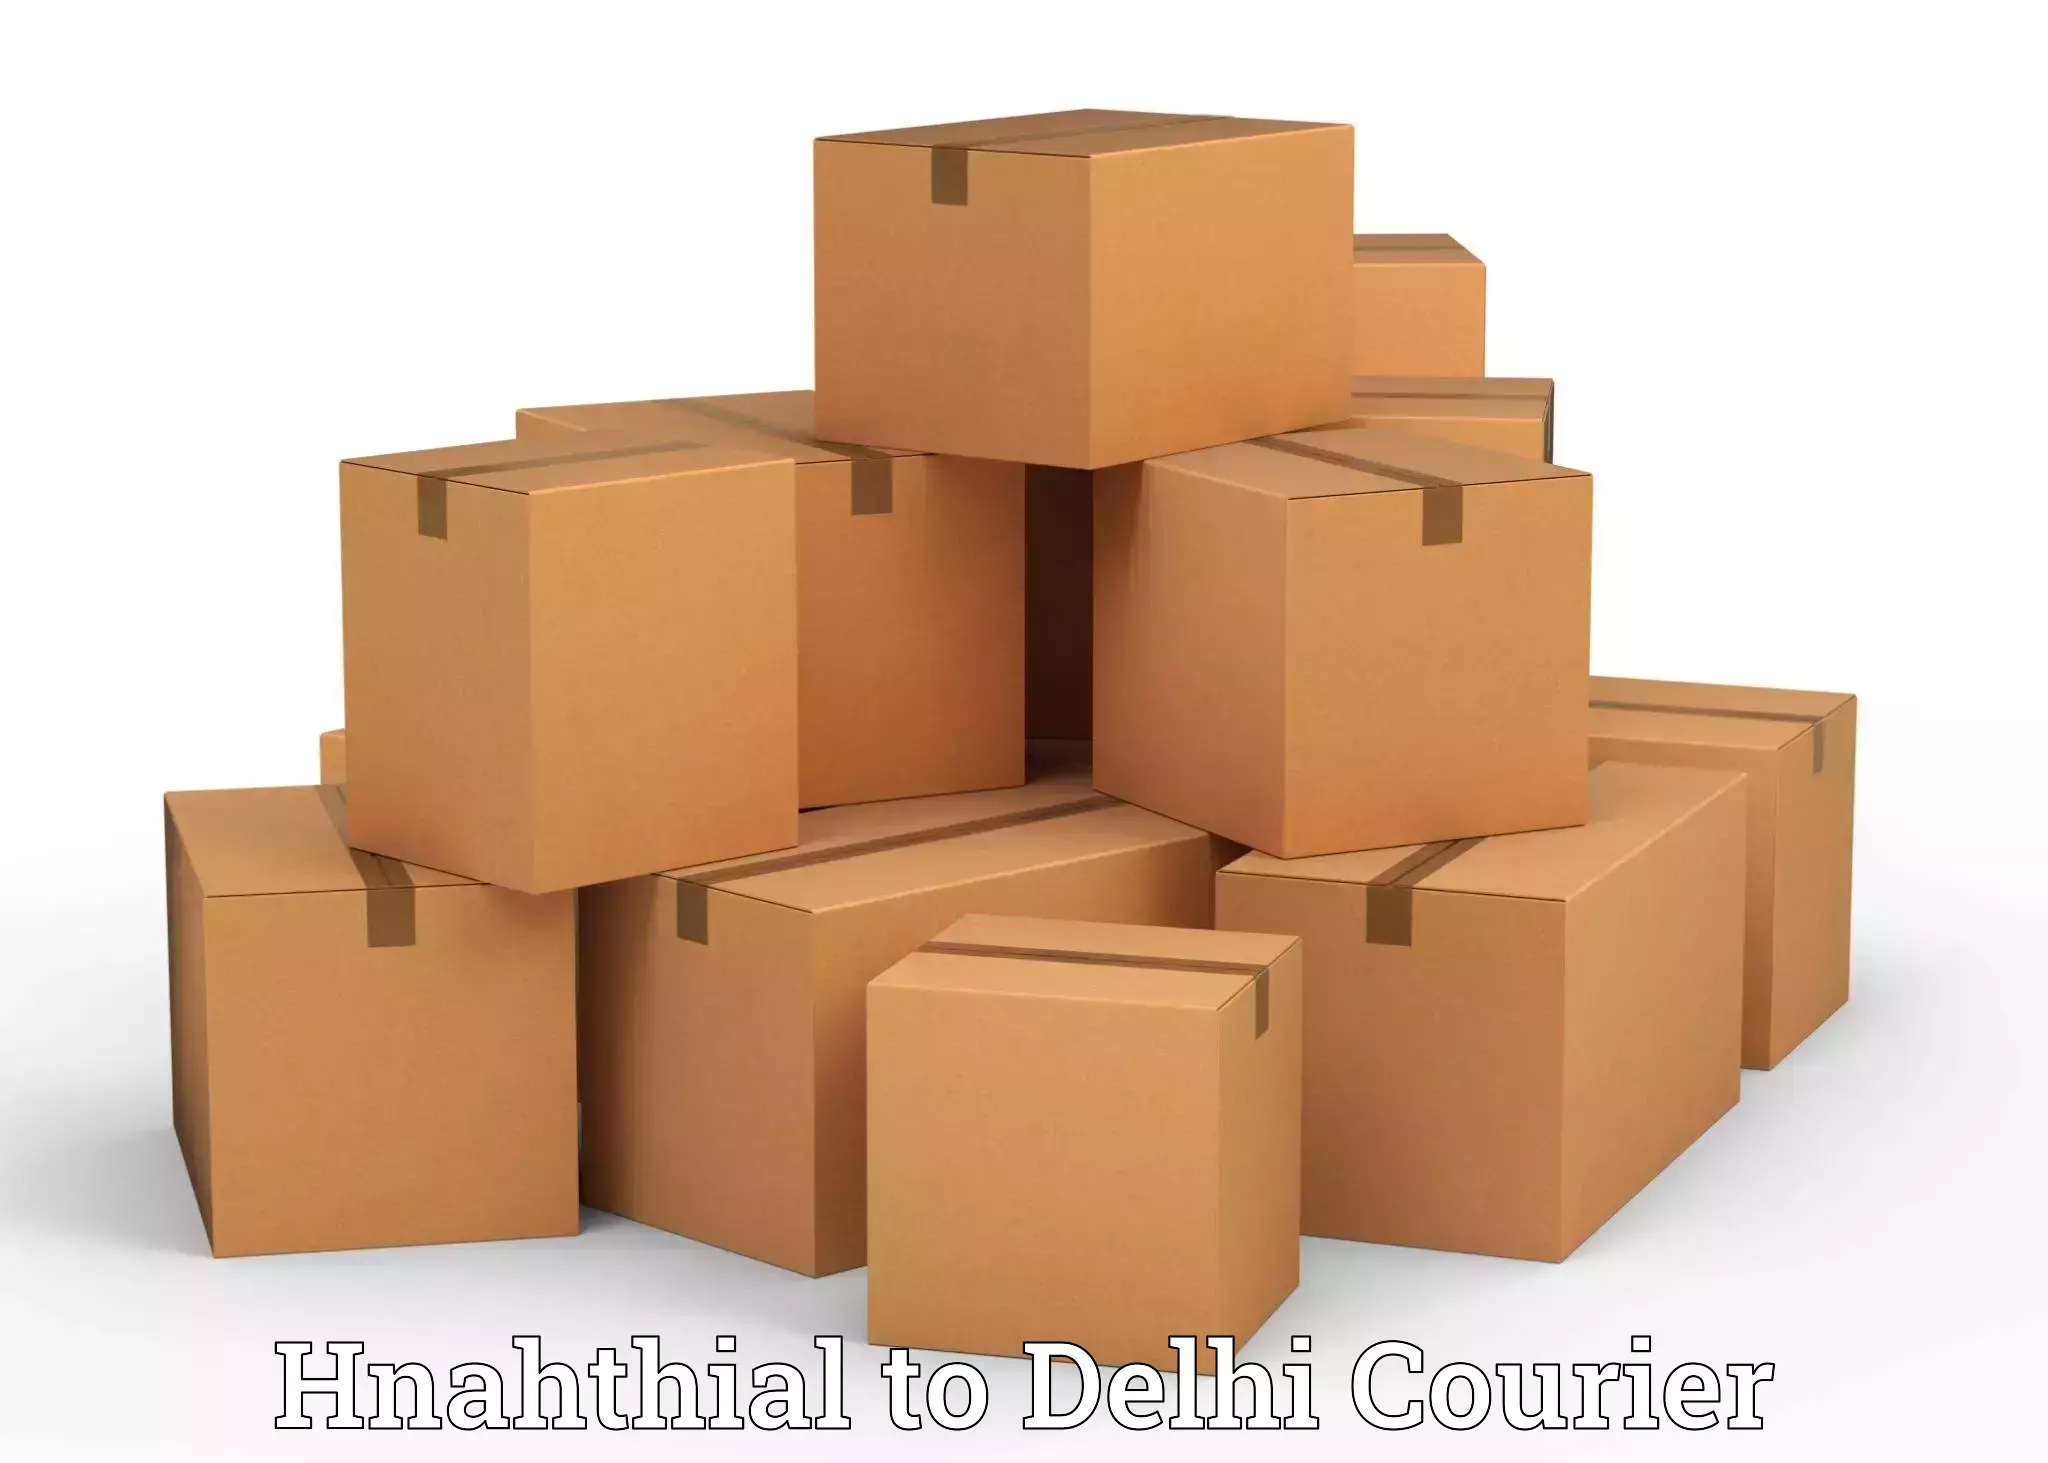 Professional furniture movers Hnahthial to Delhi